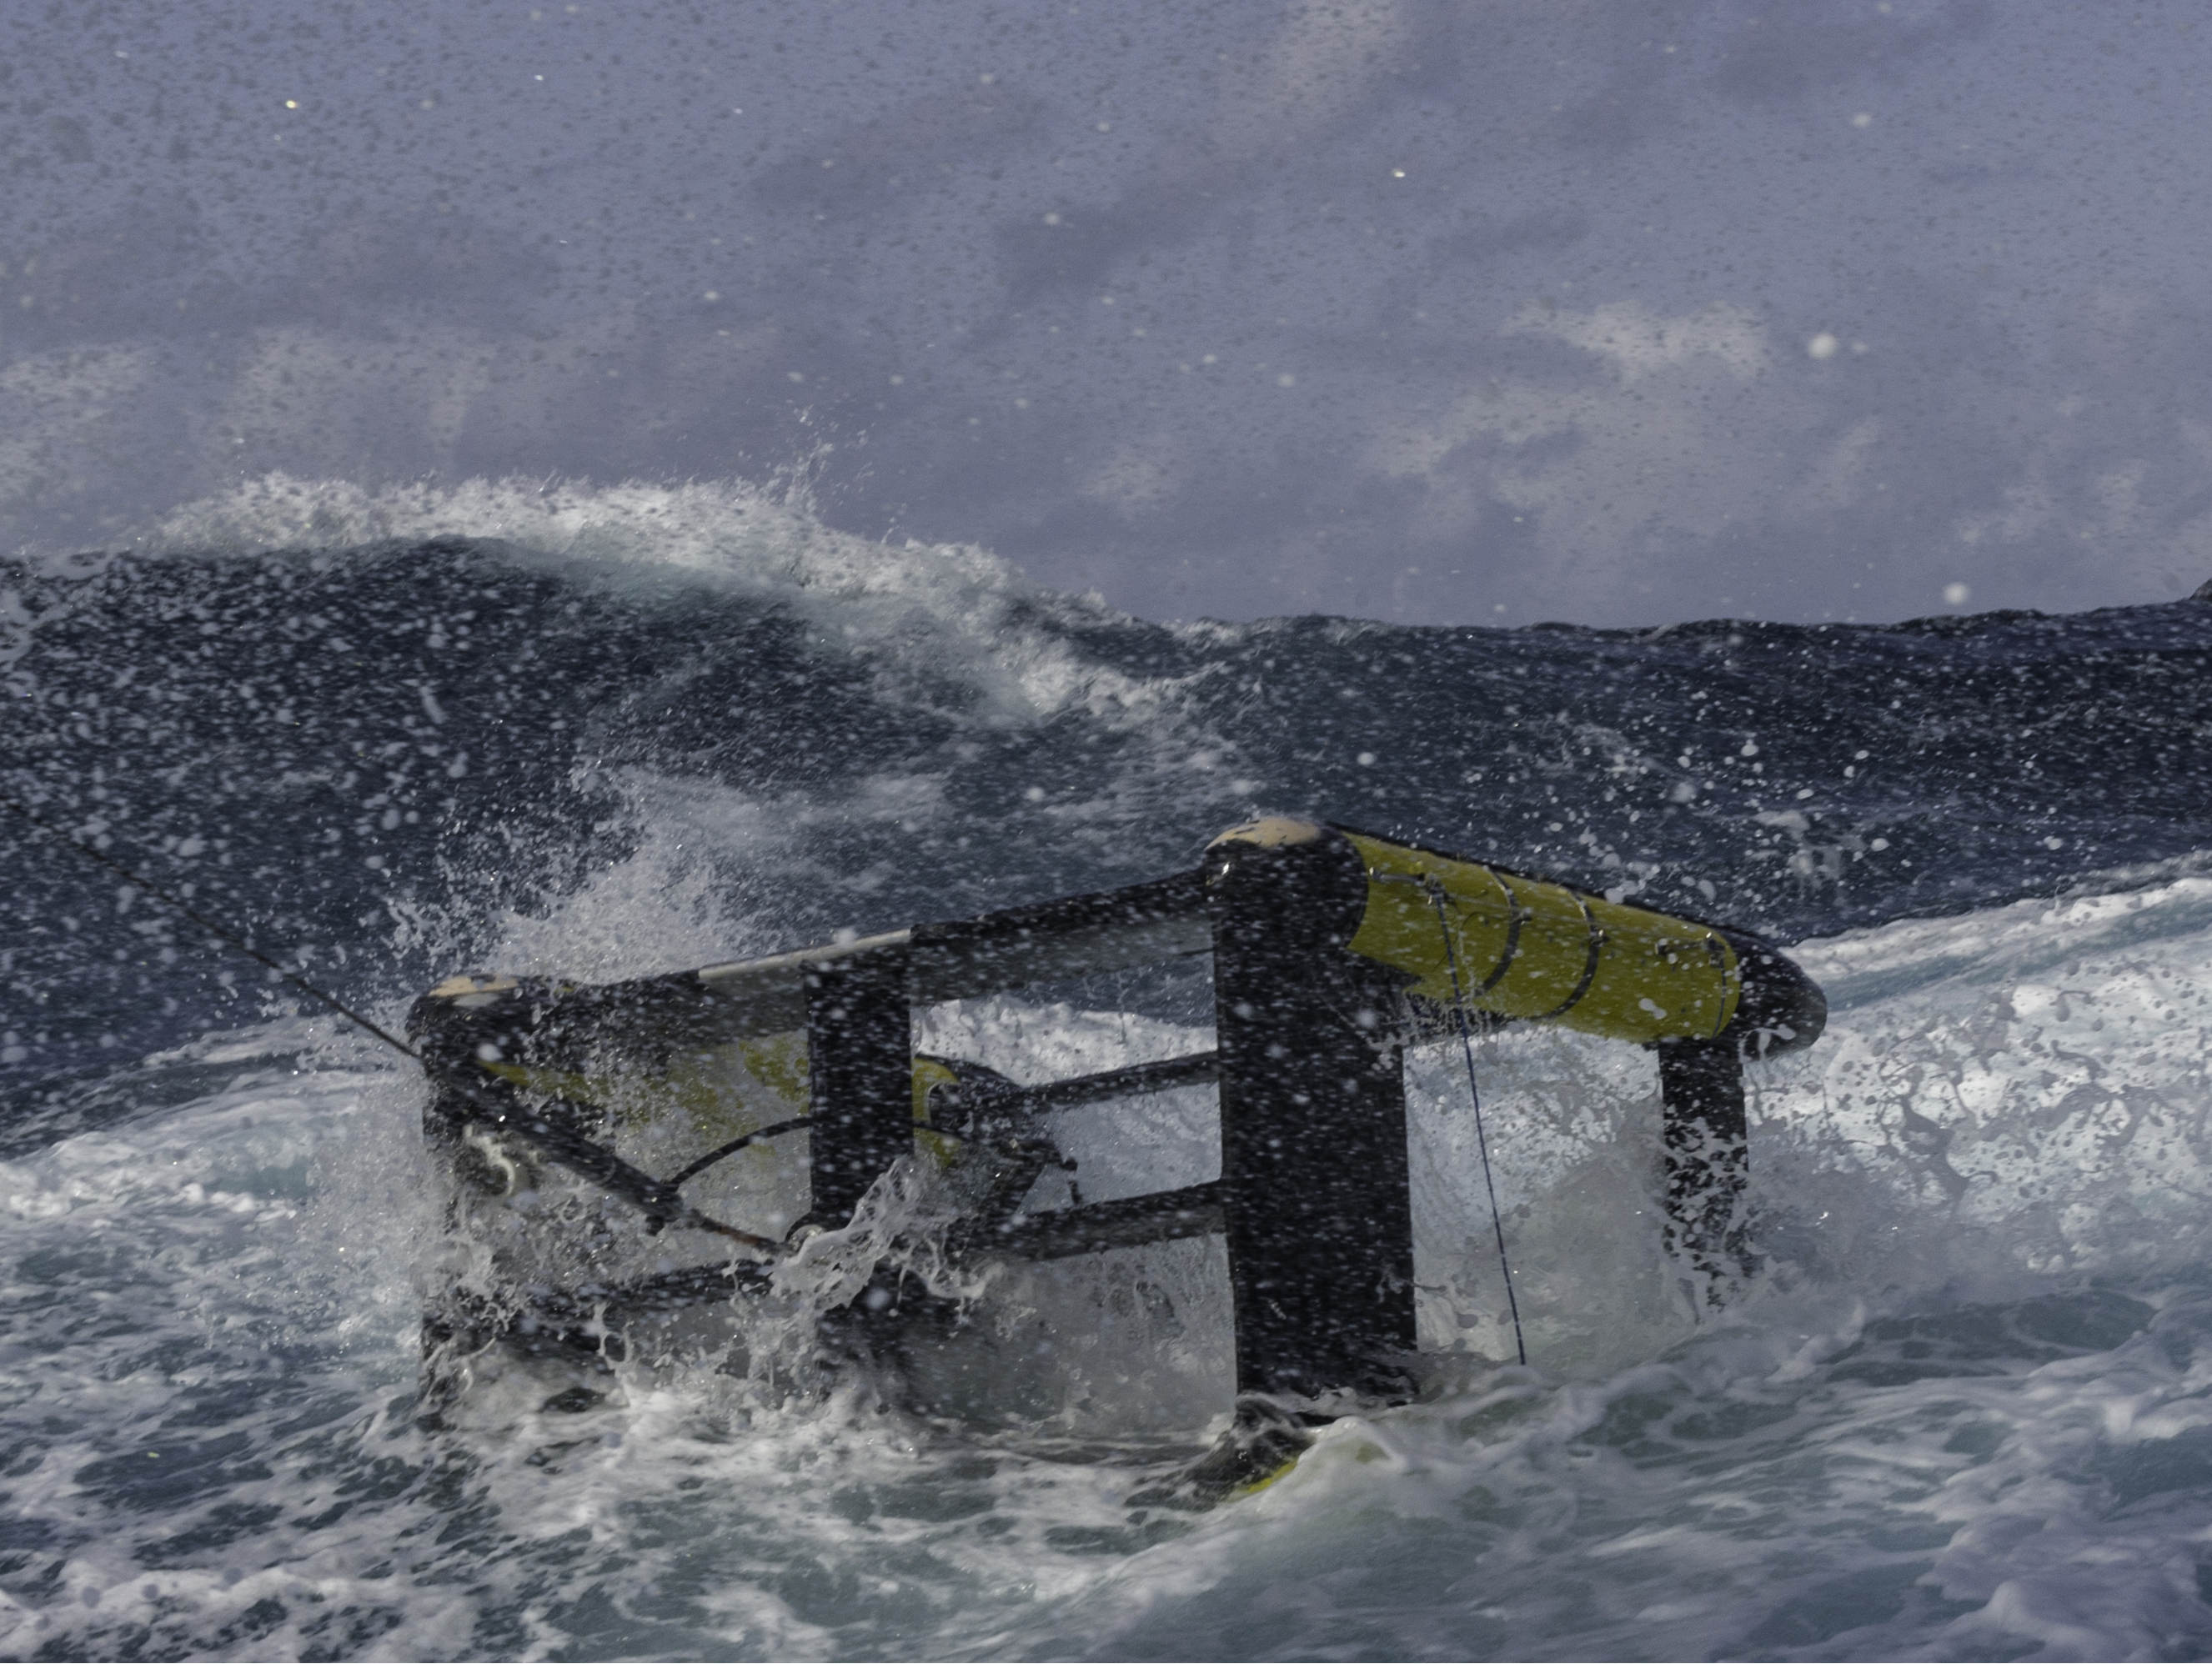 The “Triaxus” towing platform breaks through the choppy surface of the ocean during a storm. By towing such a platform with monitoring instruments through the water, changing its depth in a 'yo-yo' pattern as it traveled, scientists created high-resolution snapshots of how a dye released upstream evolved across the Gulf Stream front. Photo credit Craig M. Lee, UW APL. Click image to download hi-res version.